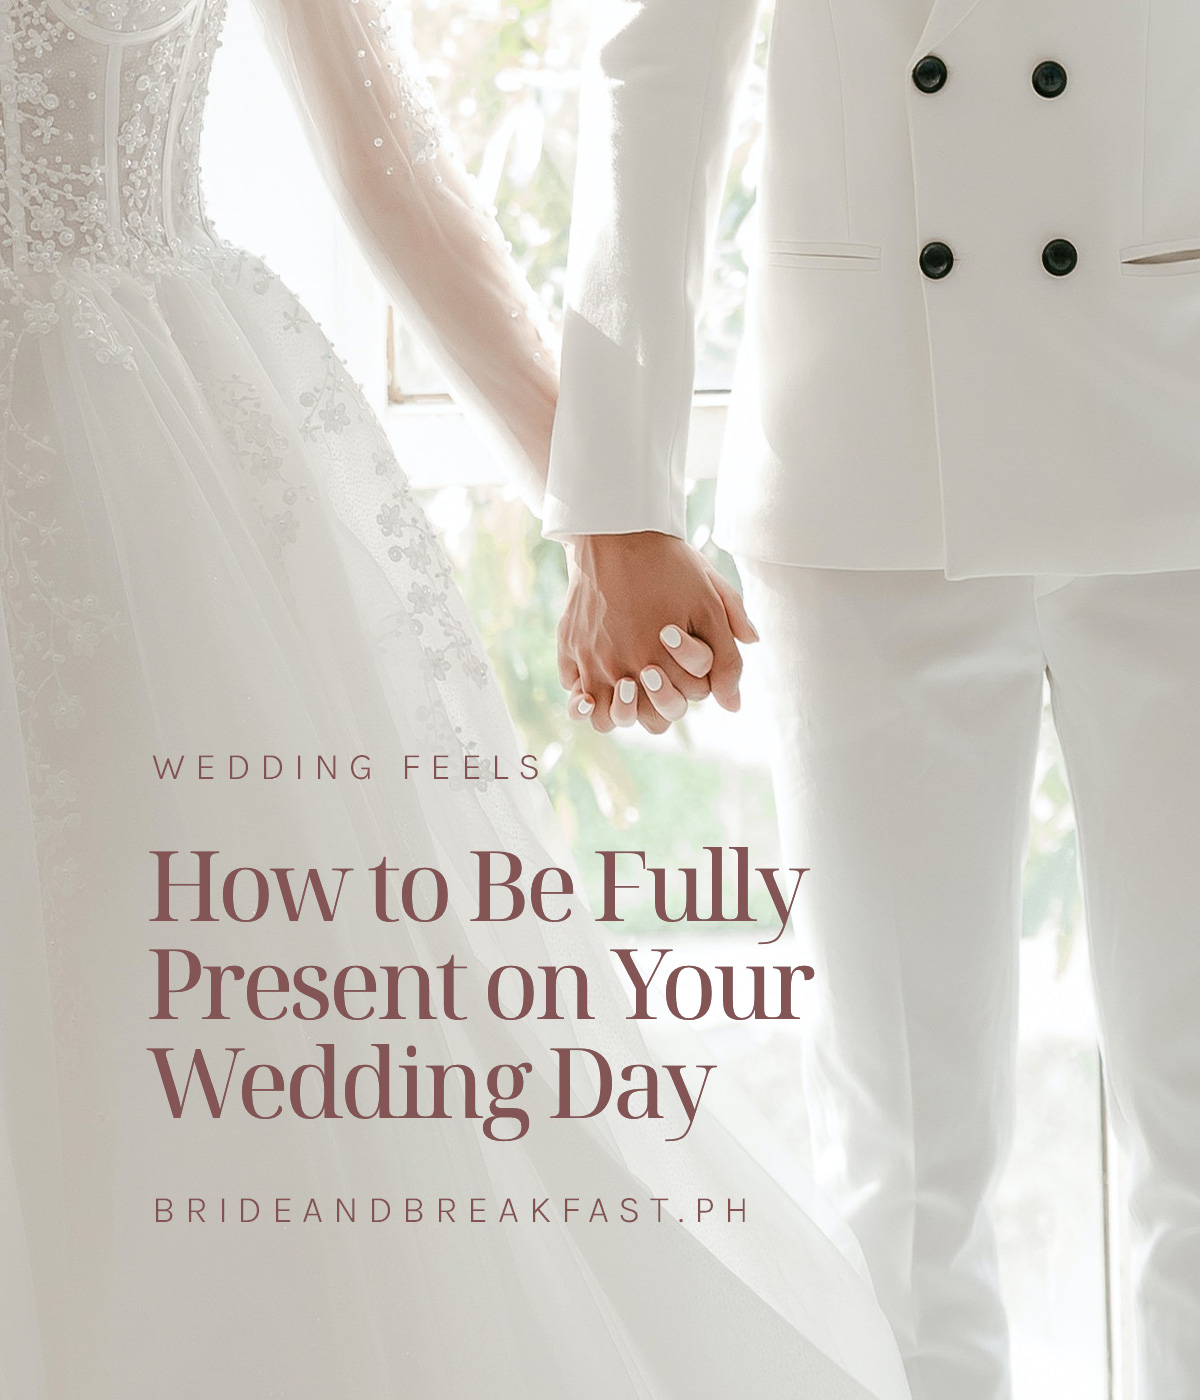 How to Be Fully Present on Your Wedding Day